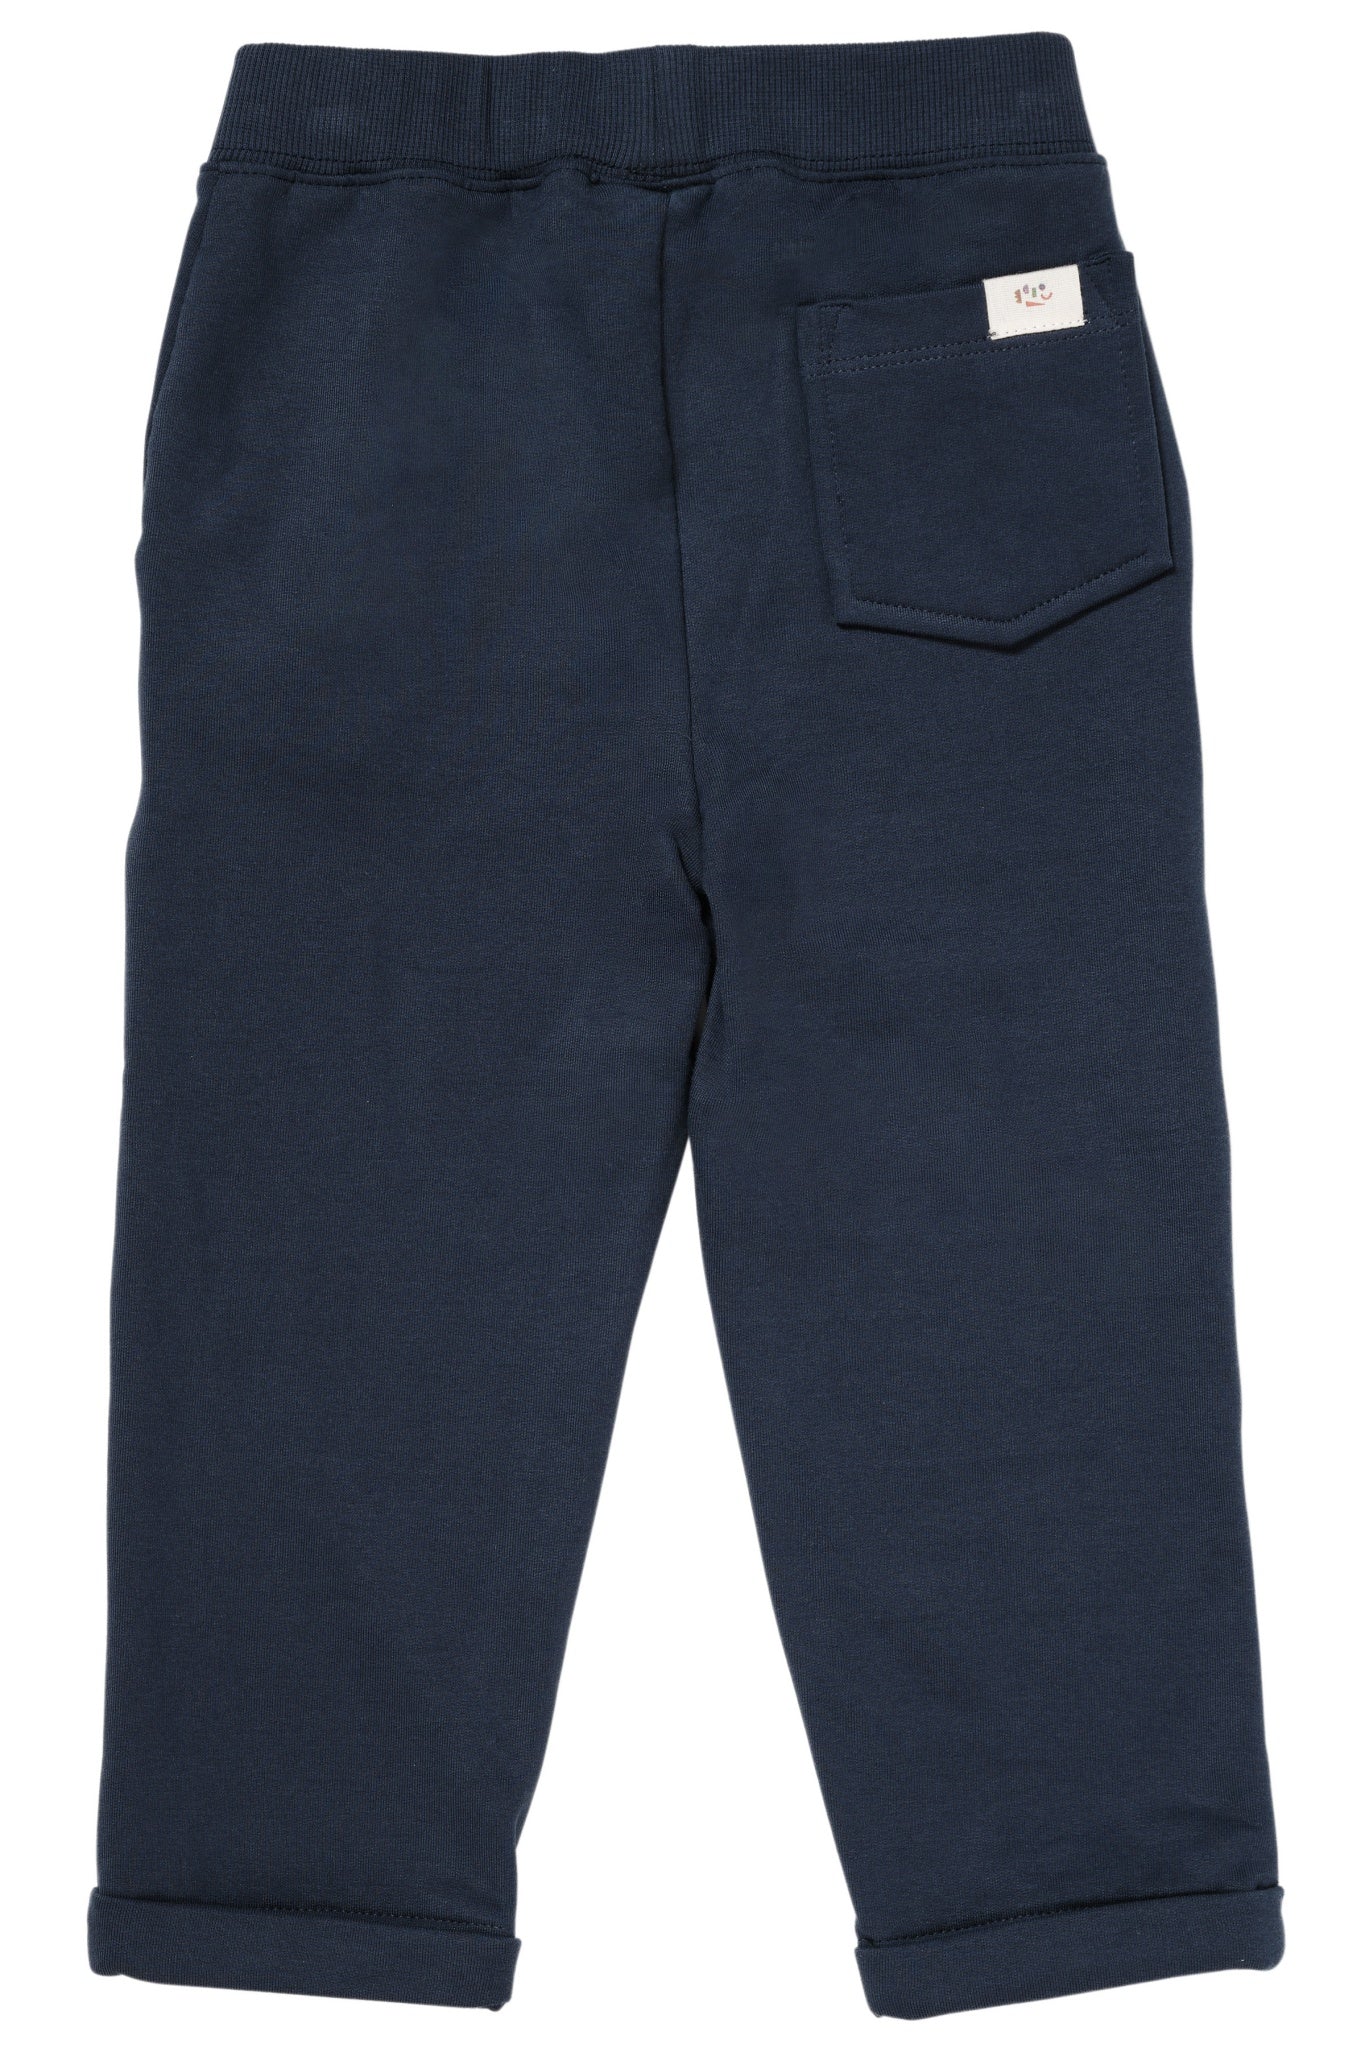 SWEAT SUITED PANTS BRUSHED - NAVY